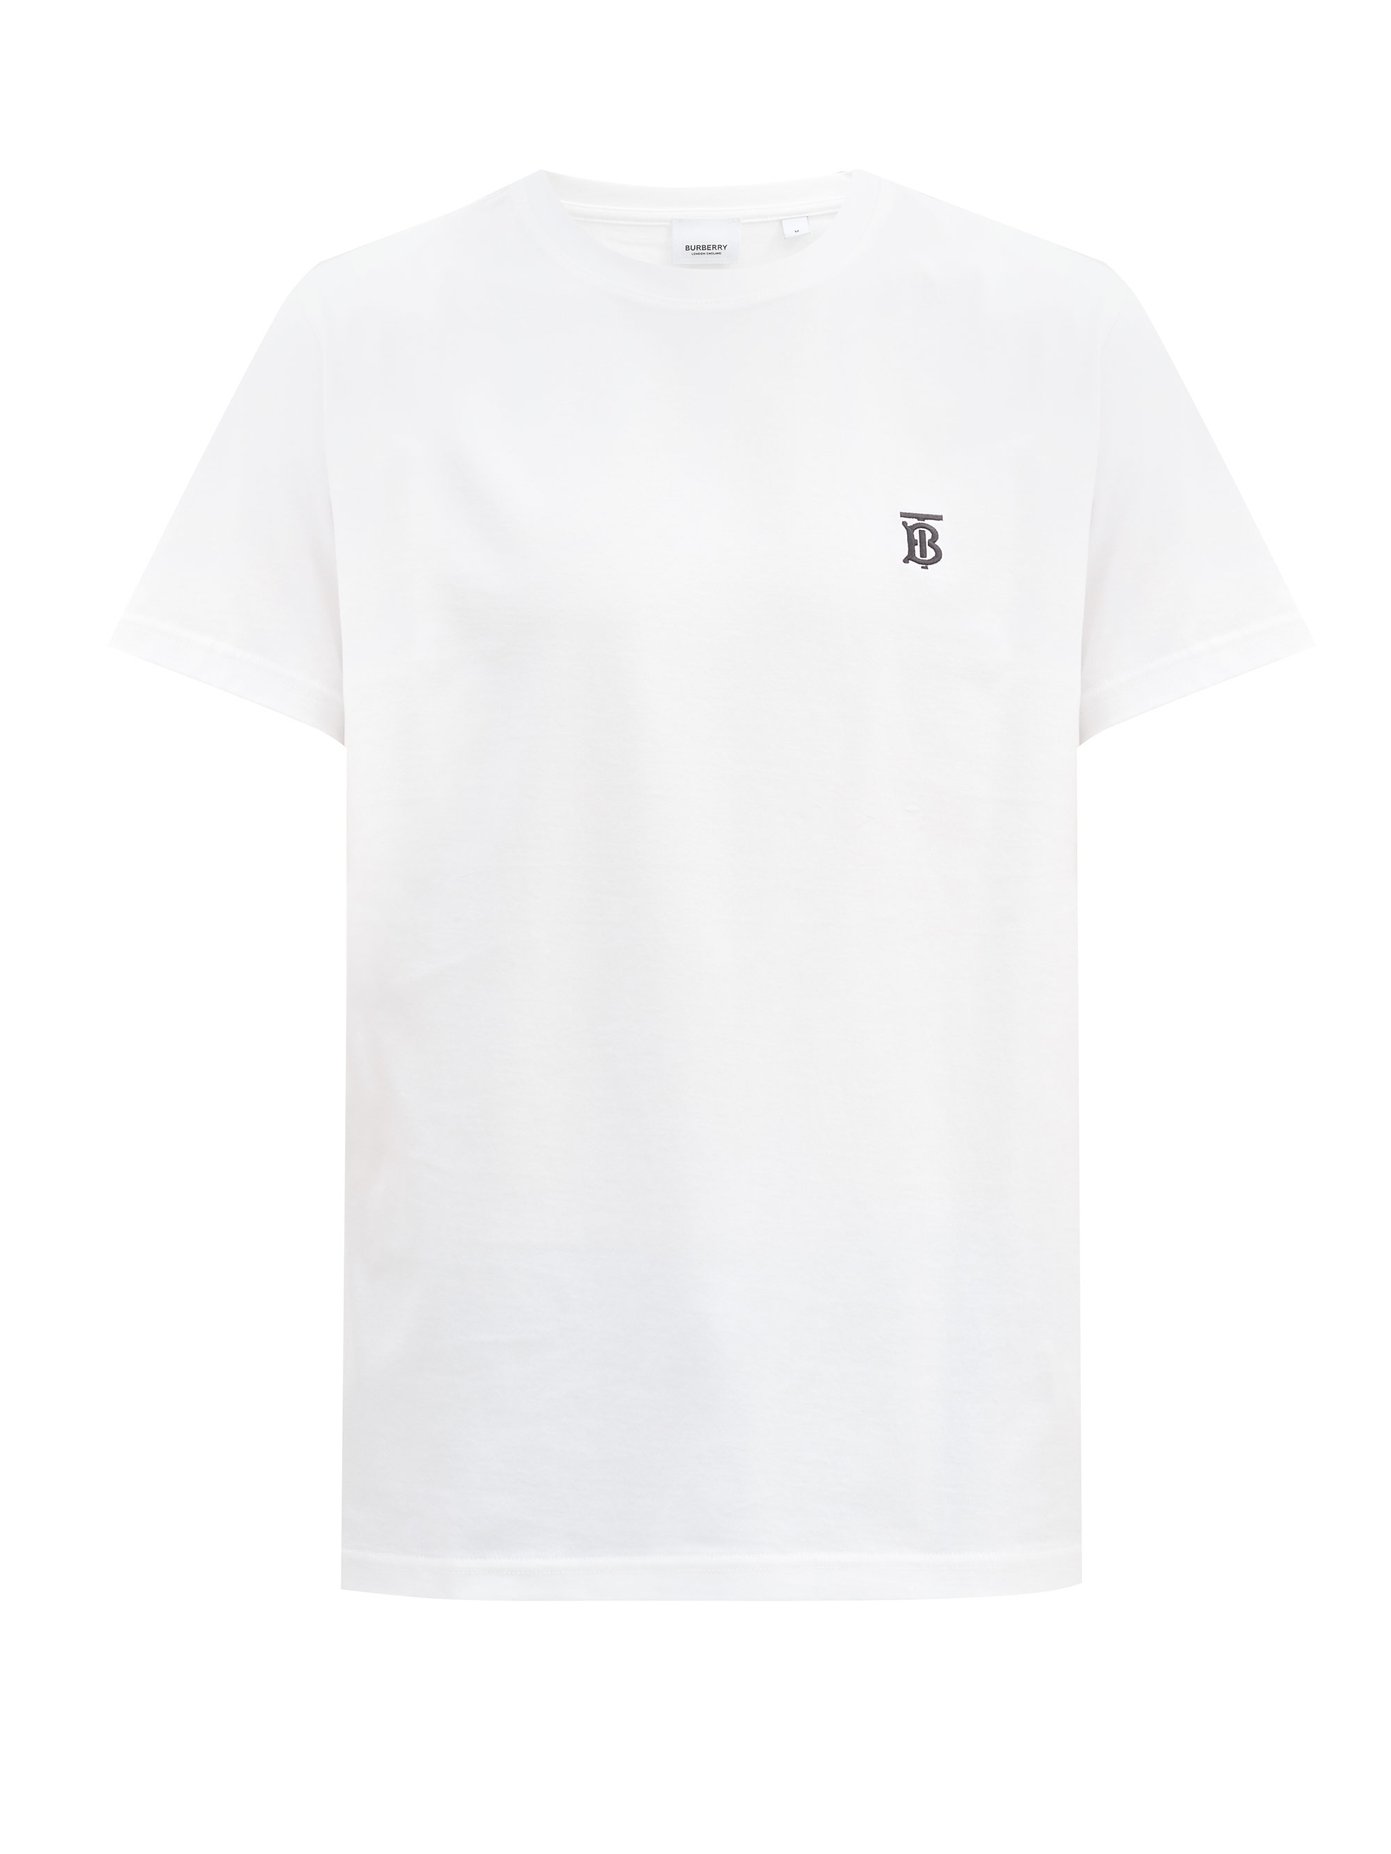 burberry embroidered t shirt